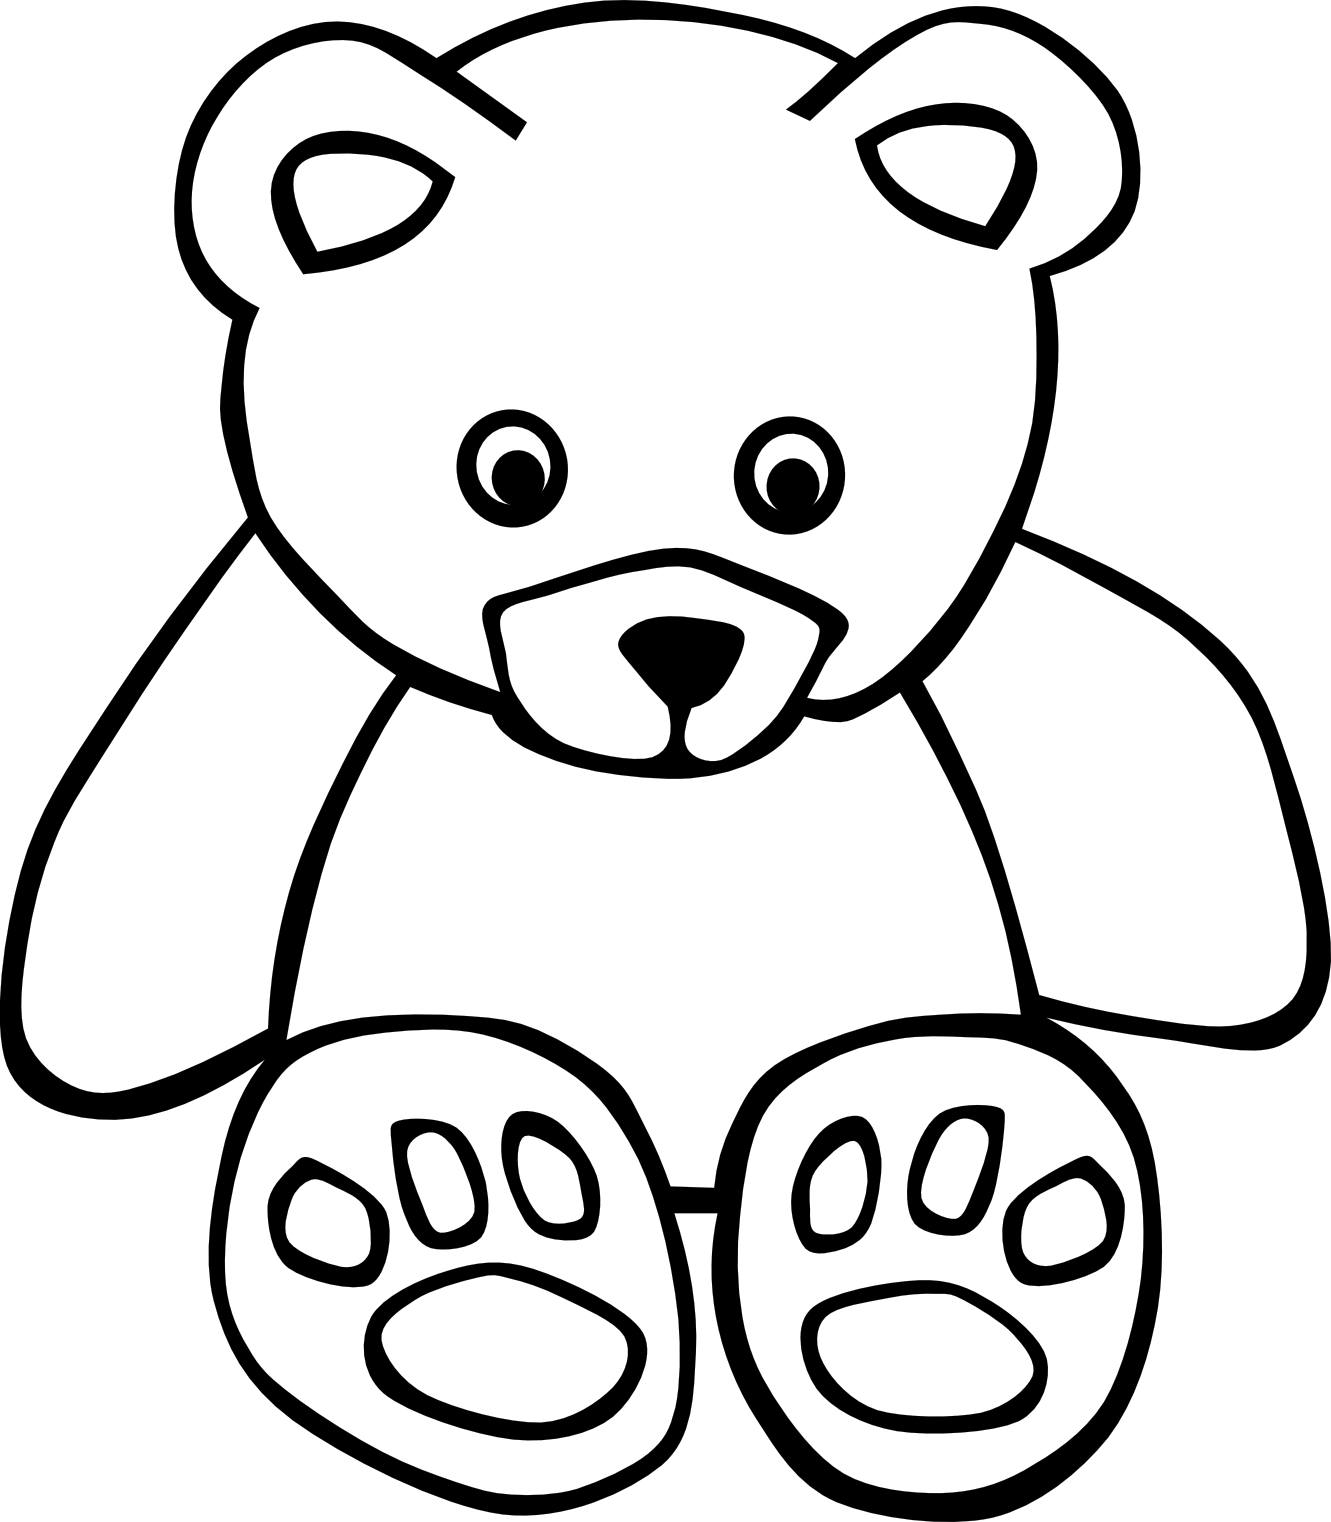 Free clipart black and white